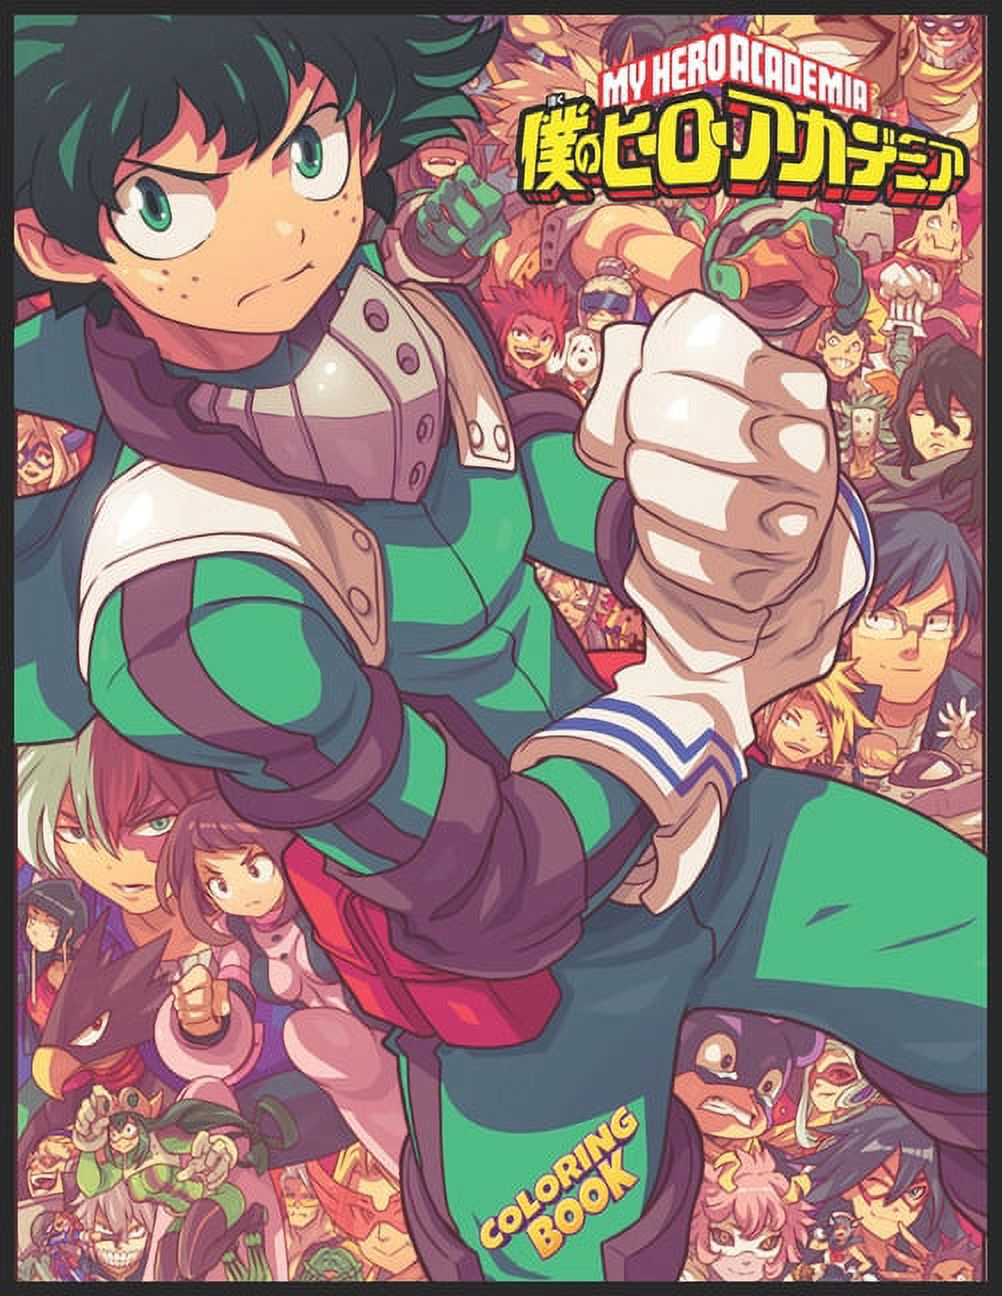 My Hero Academia Coloring Book : Deku A Flawless Coloring Book And Great Gift For Kids And Adults Relaxation With Illustrations Of My Hero Academia To Unleash Artistic Potential And Have Fun (Paperback) - image 1 of 1